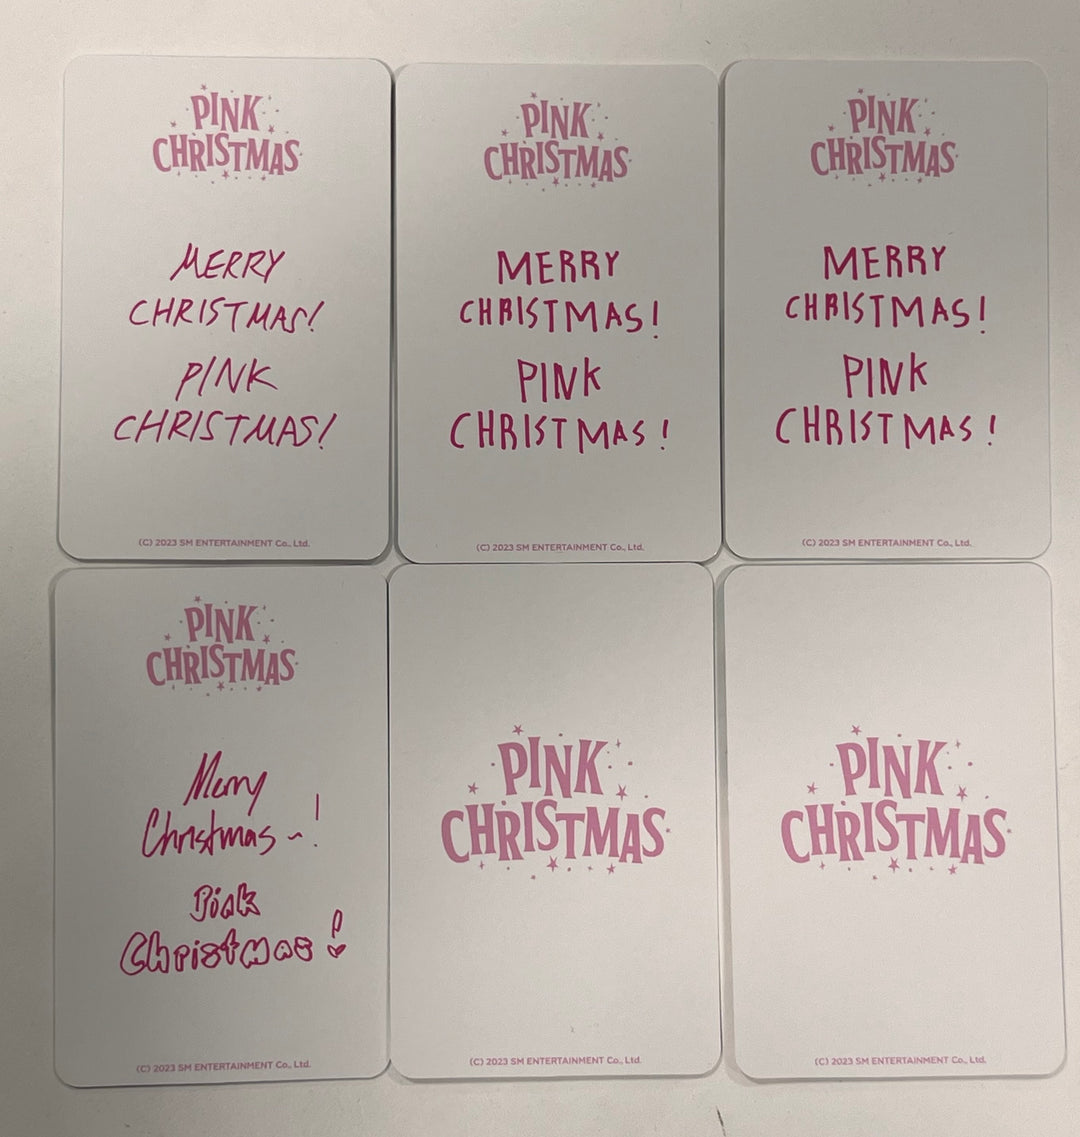 RIIZE "Pink Christmas" - Official Trading Photocard [24.2.19]